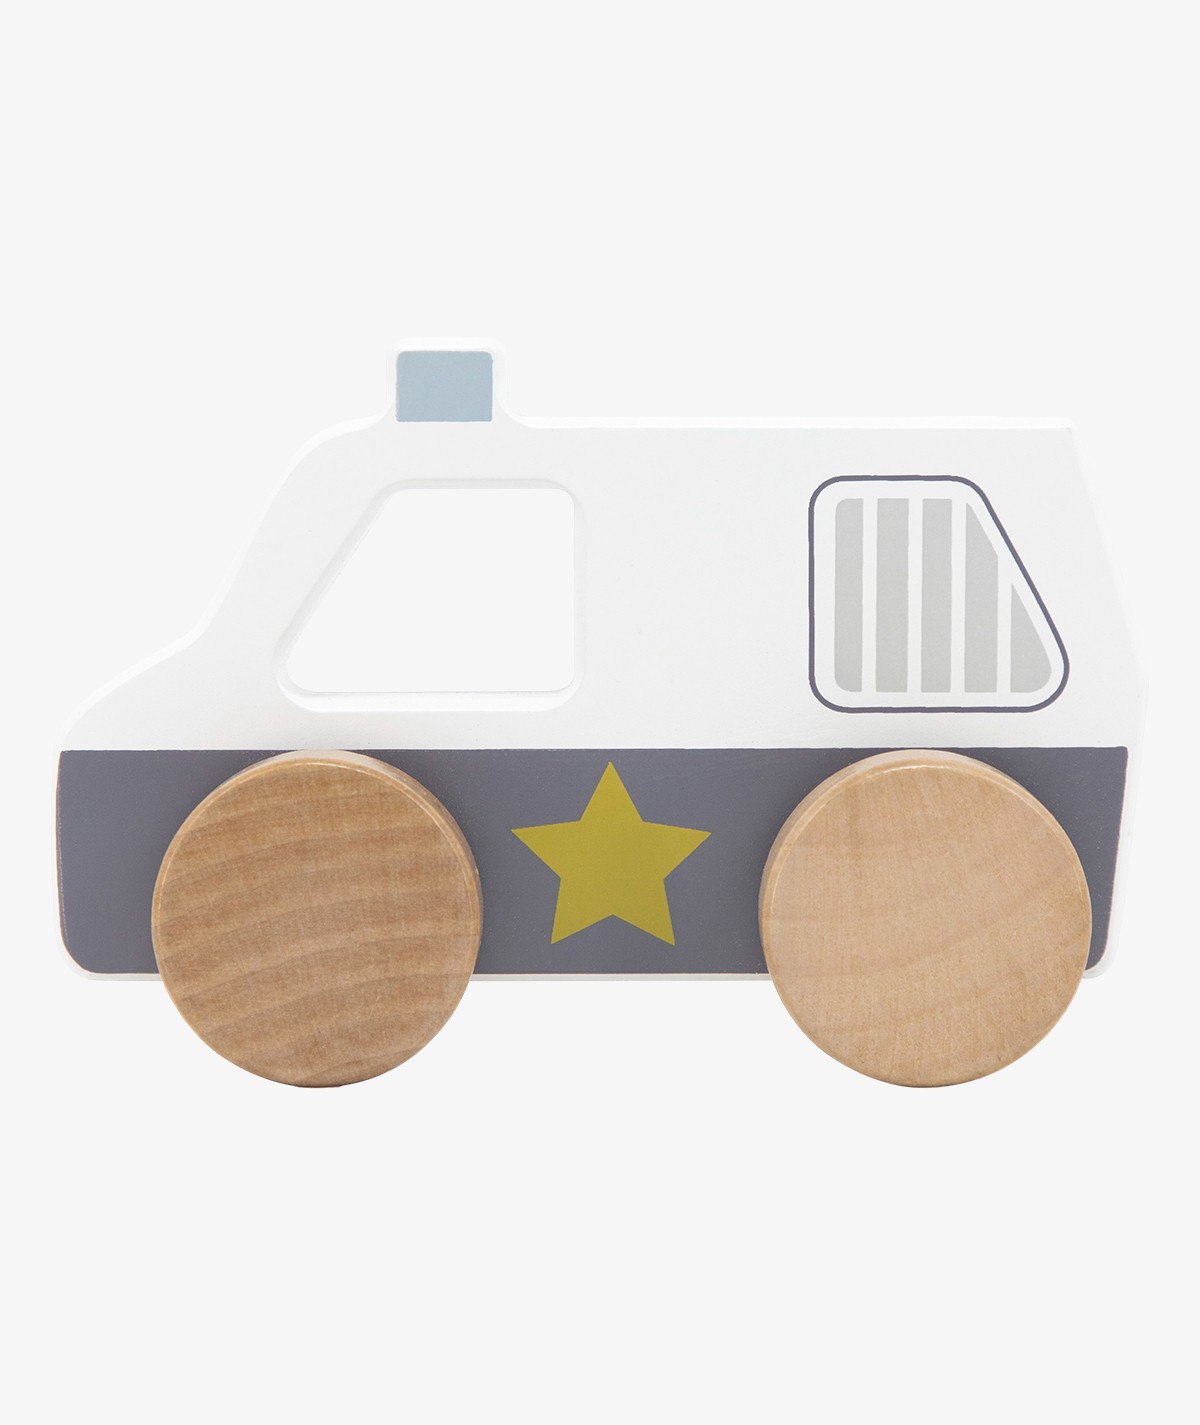 Wooden Police Car Toy